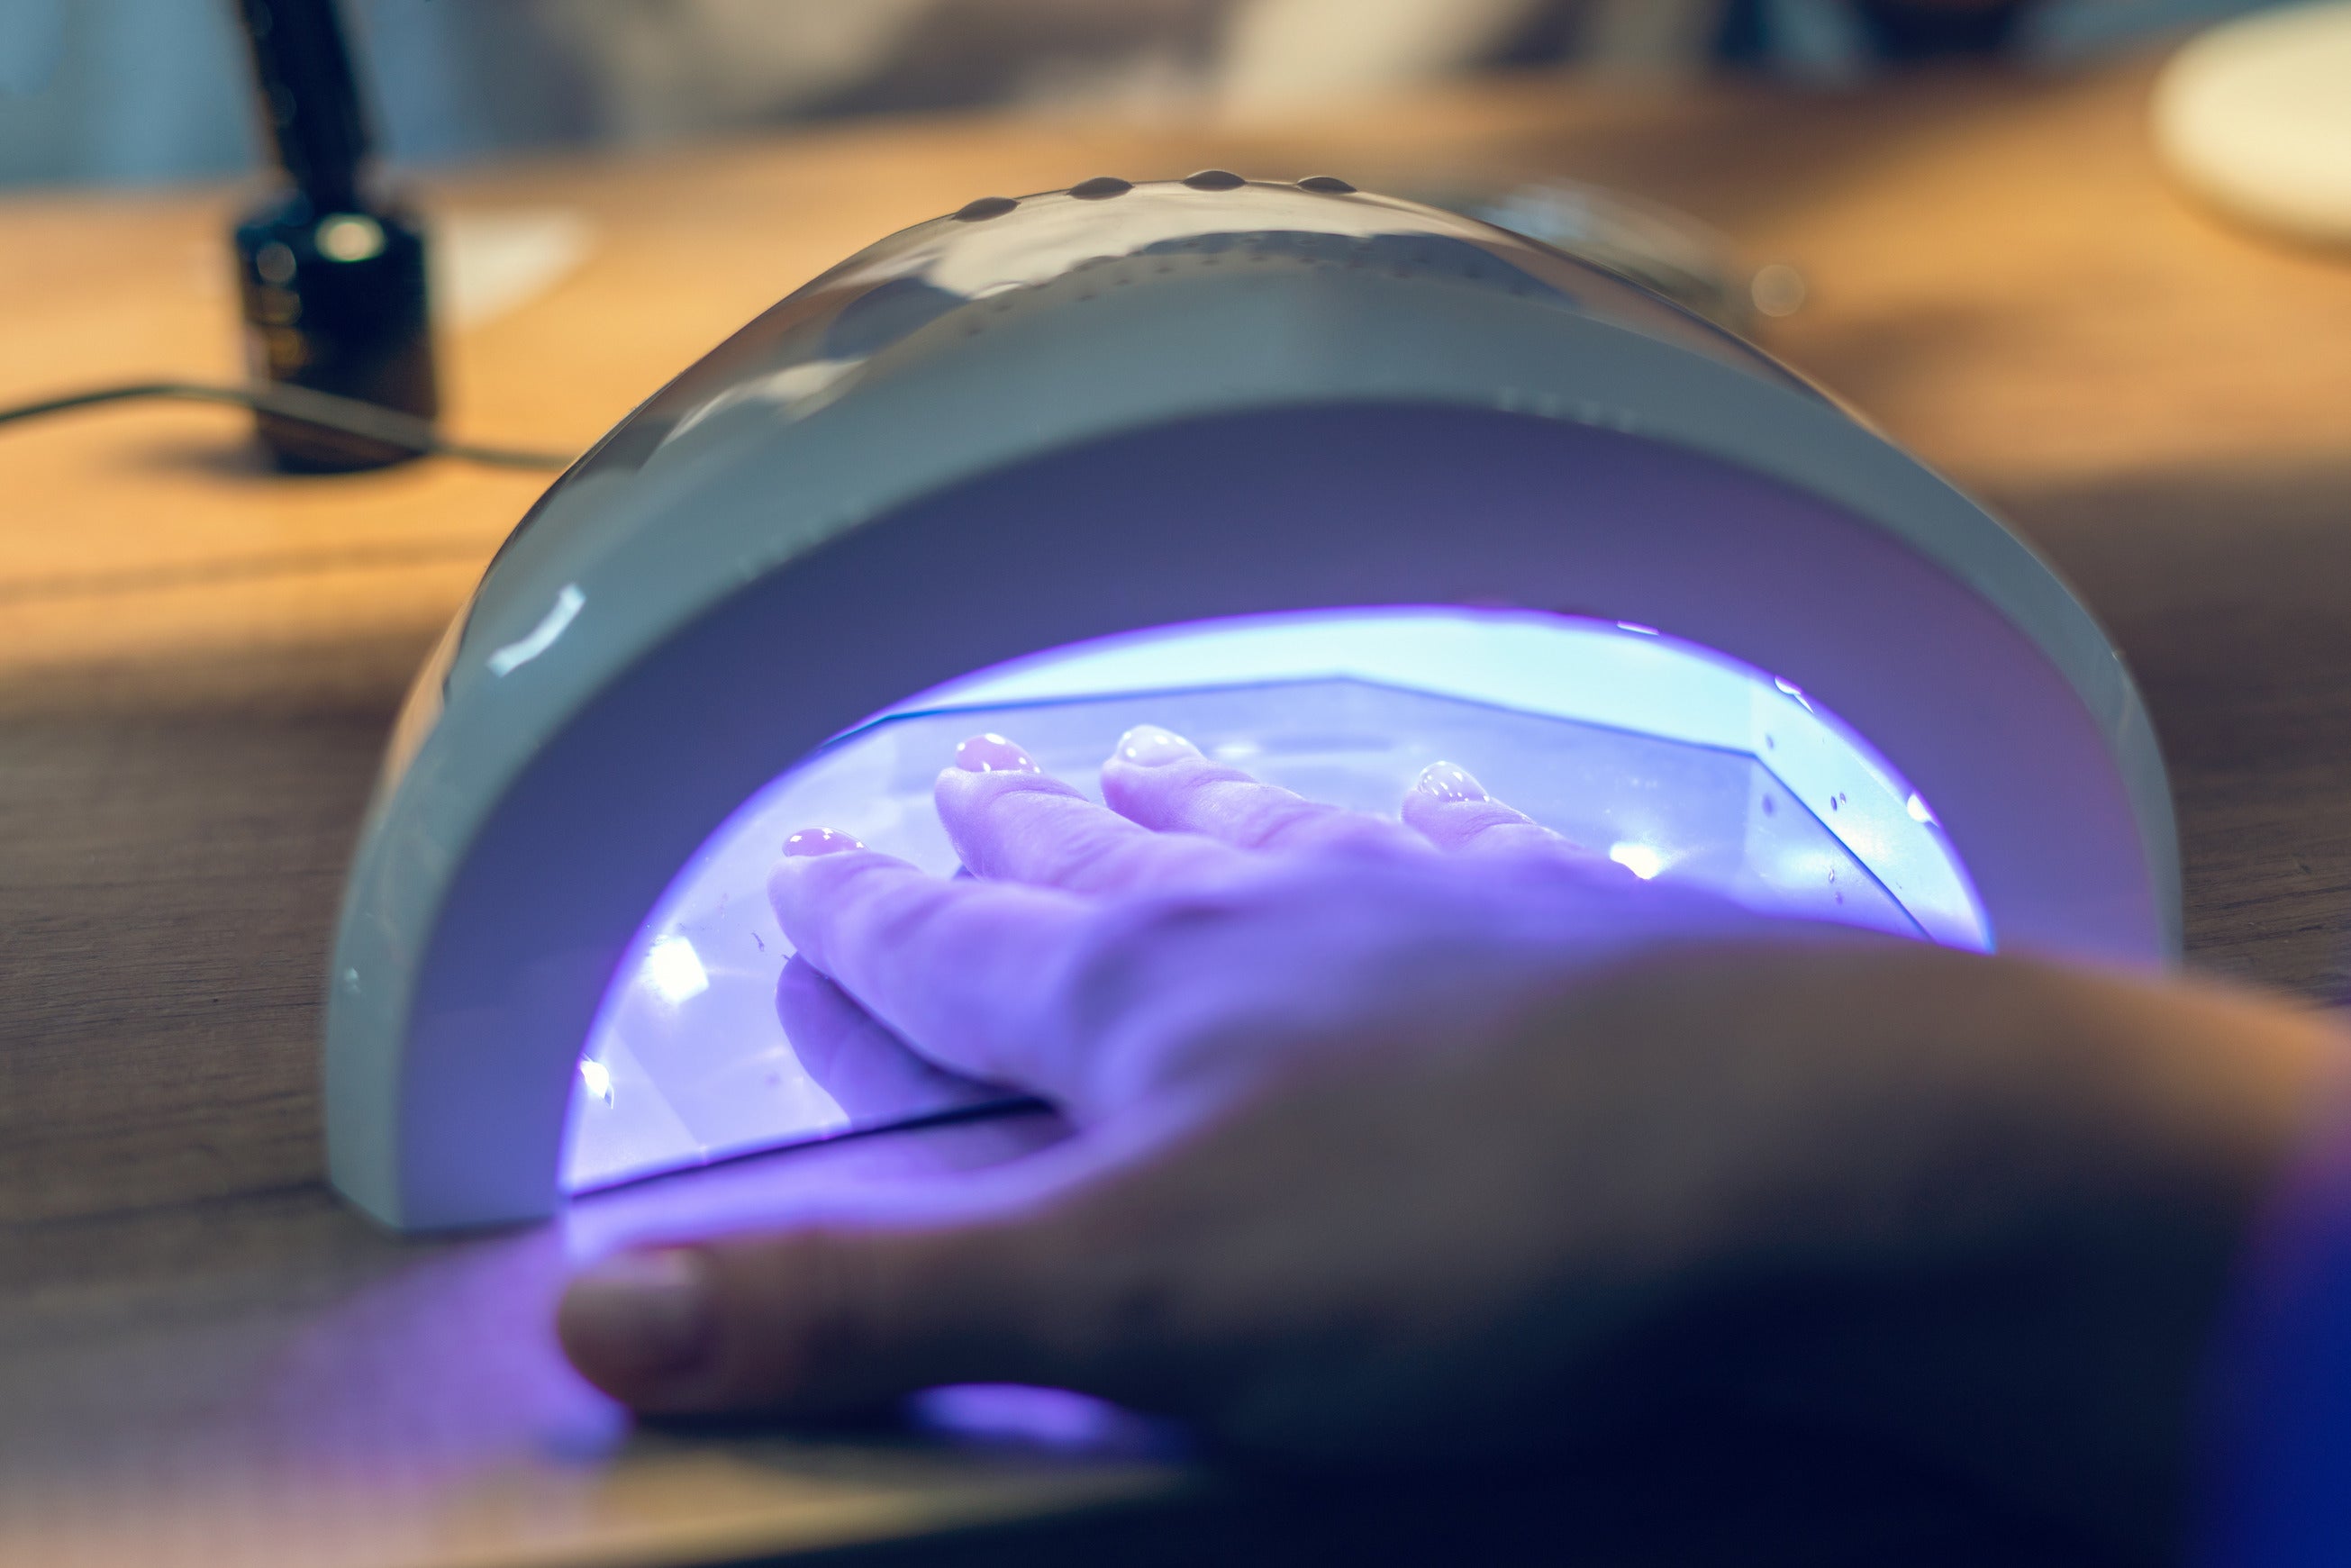 Nails being cured in a UV Lamp after gel polish has been applied